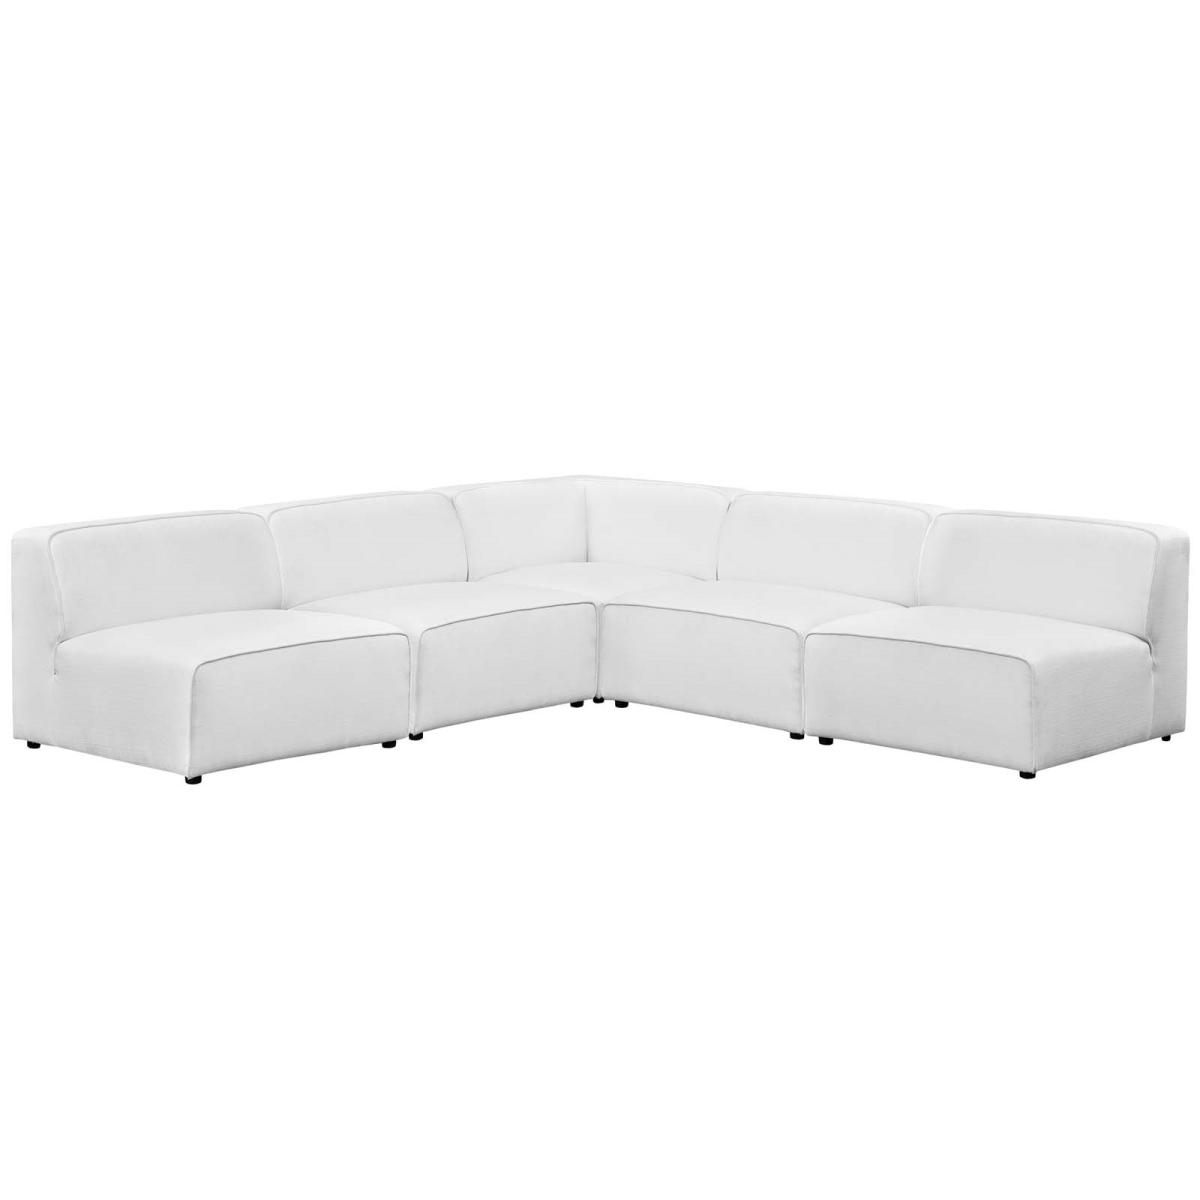 Eei-2839-whi 5 Piece Mingle Upholstered Fabric Armless Sectional Sofa Set - White, 27 X 106 X 106 In.